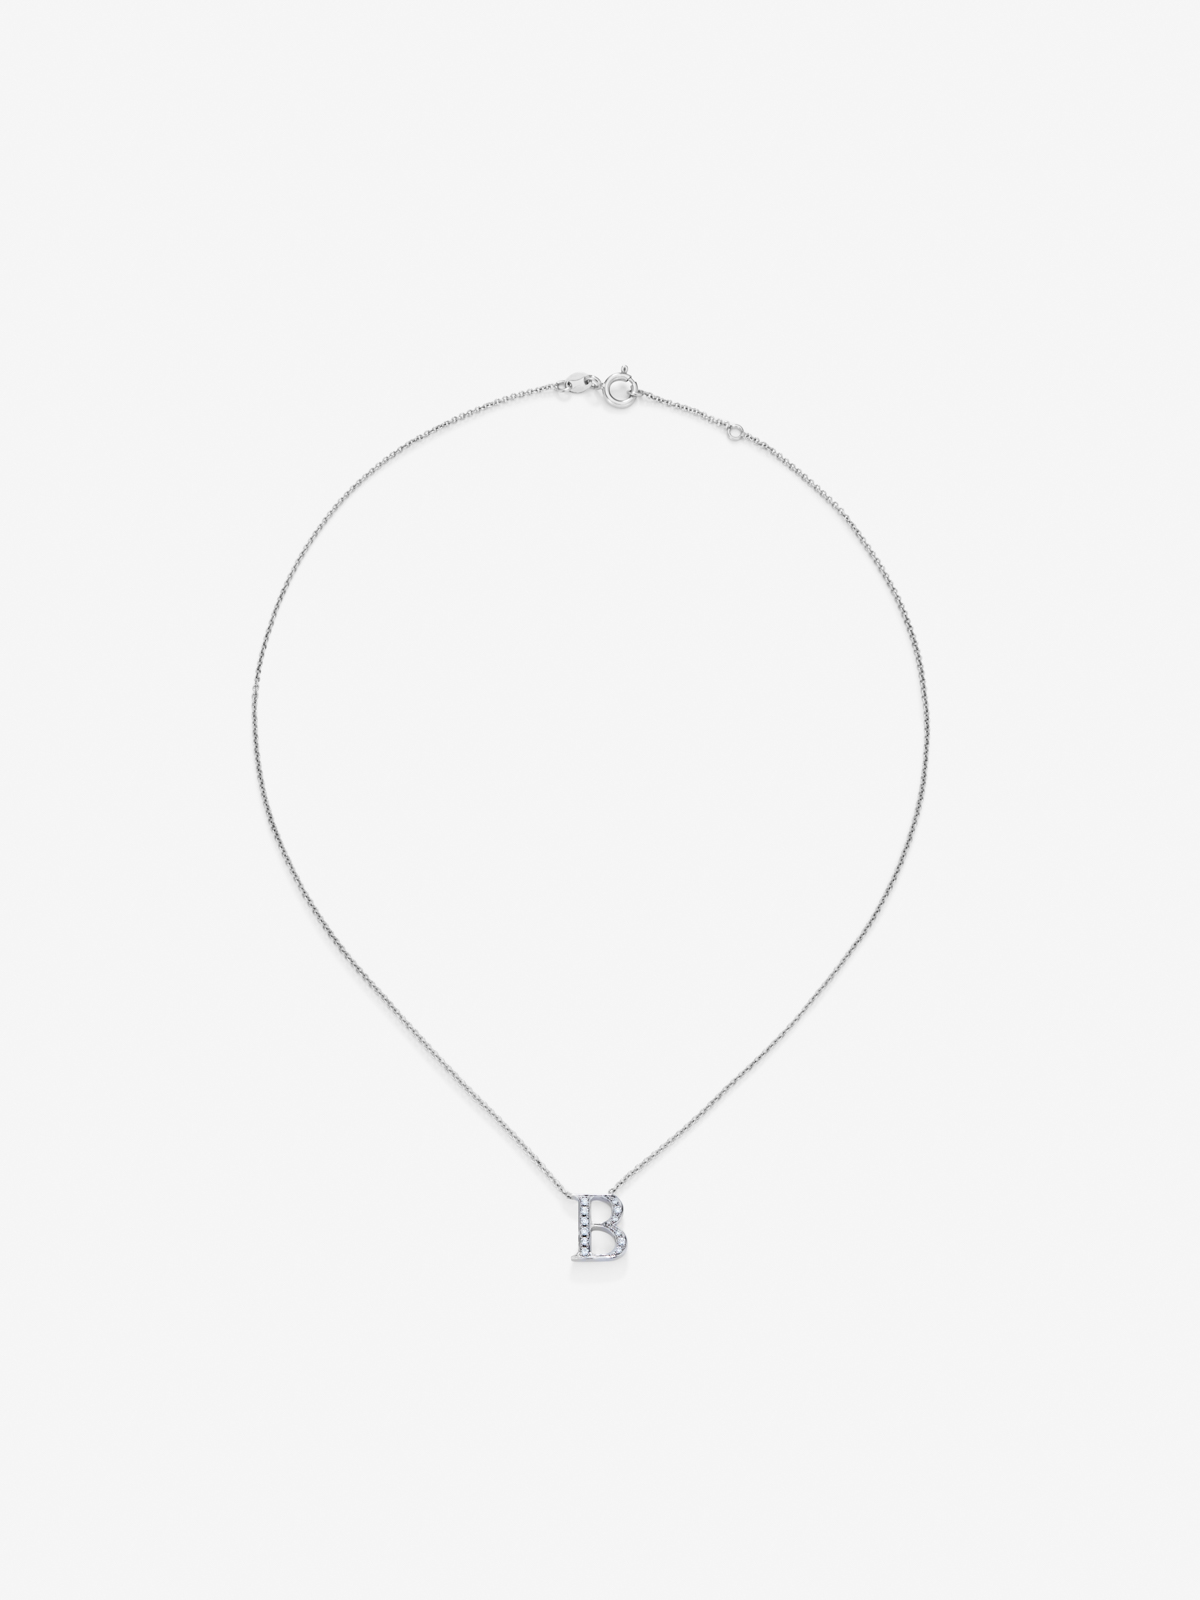 Pendant necklace with 18K white gold initial and diamonds